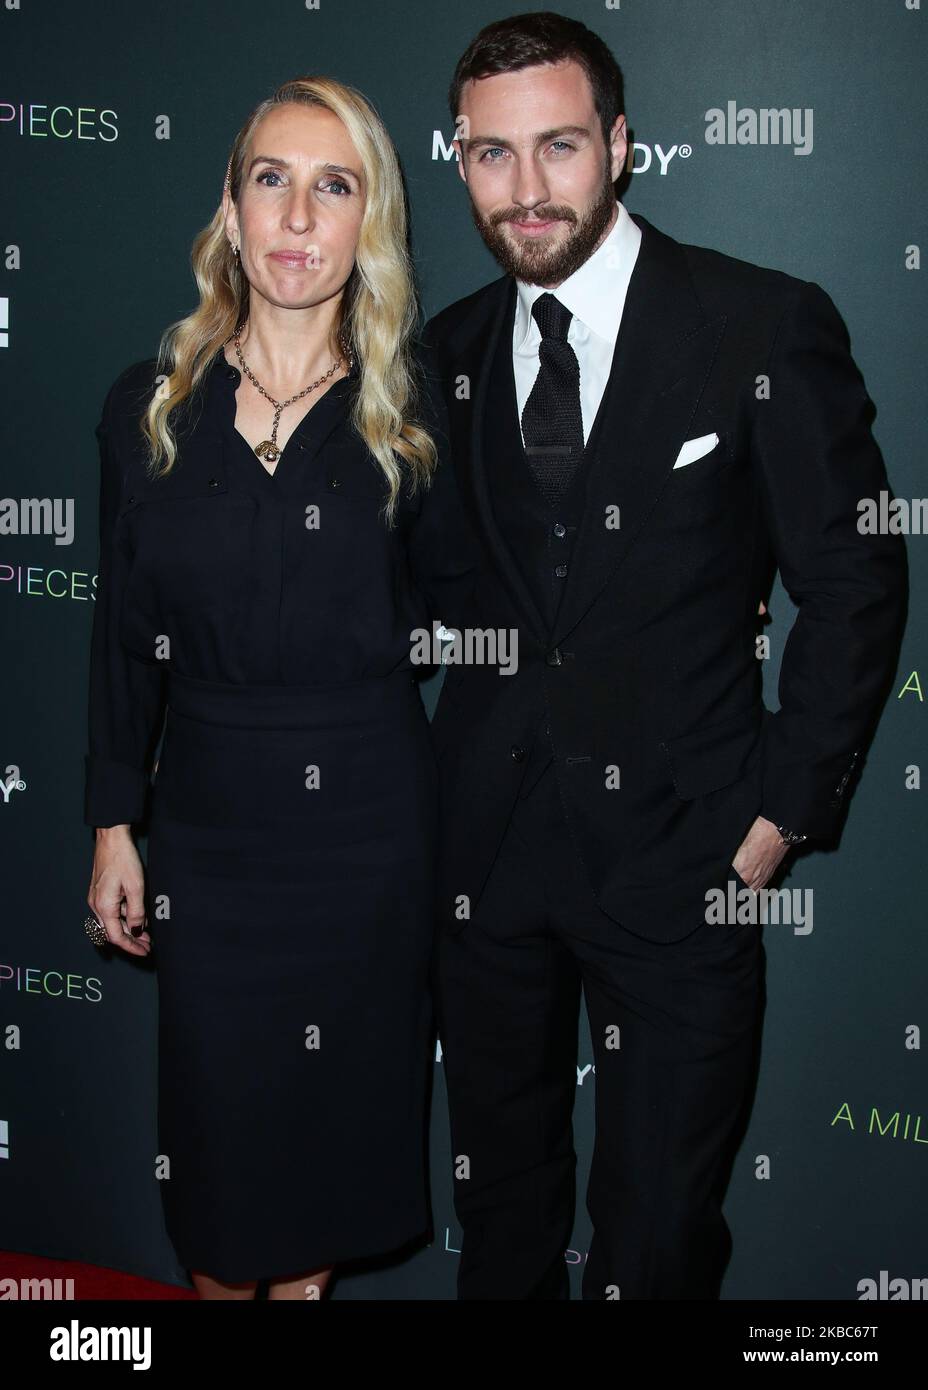 WEST HOLLYWOOD, LOS ANGELES, CALIFORNIA, USA - DECEMBER 04: Sam Taylor-Johnson and husband Aaron Taylor-Johnson arrive at the Los Angeles Special Screening Of Momentum Pictures' 'A Million Little Pieces' held at The London Hotel West Hollywood at Beverly Hills on December 4, 2019 in West Hollywood, Los Angeles, California, United States. (Photo by Xavier Collin/Image Press Agency/NurPhoto) Stock Photo